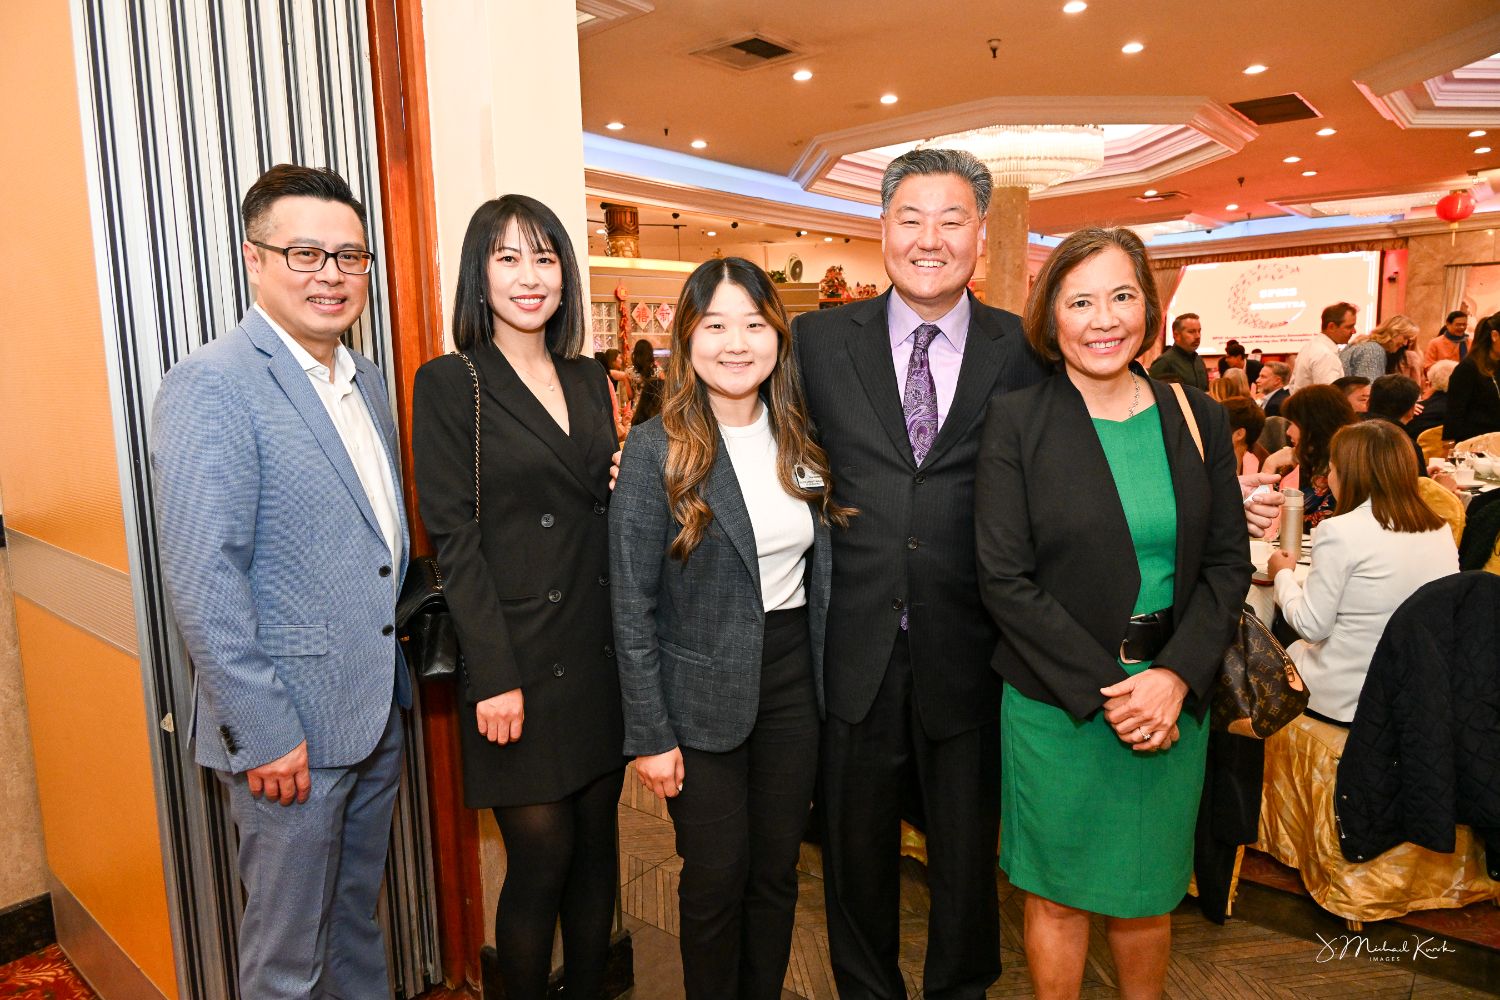 PHOTO: J. Michael Kwok | The South Pasadenan | Guests at the banquet are (L-R) George Hsieh and Suli Su of EastWest Bank; Erica Nam of the office of State Sen. Anthony Portantino; Sam Park of Renew UMC, and Kristine Kwong, president, Pasadena City College Board of Trustees.